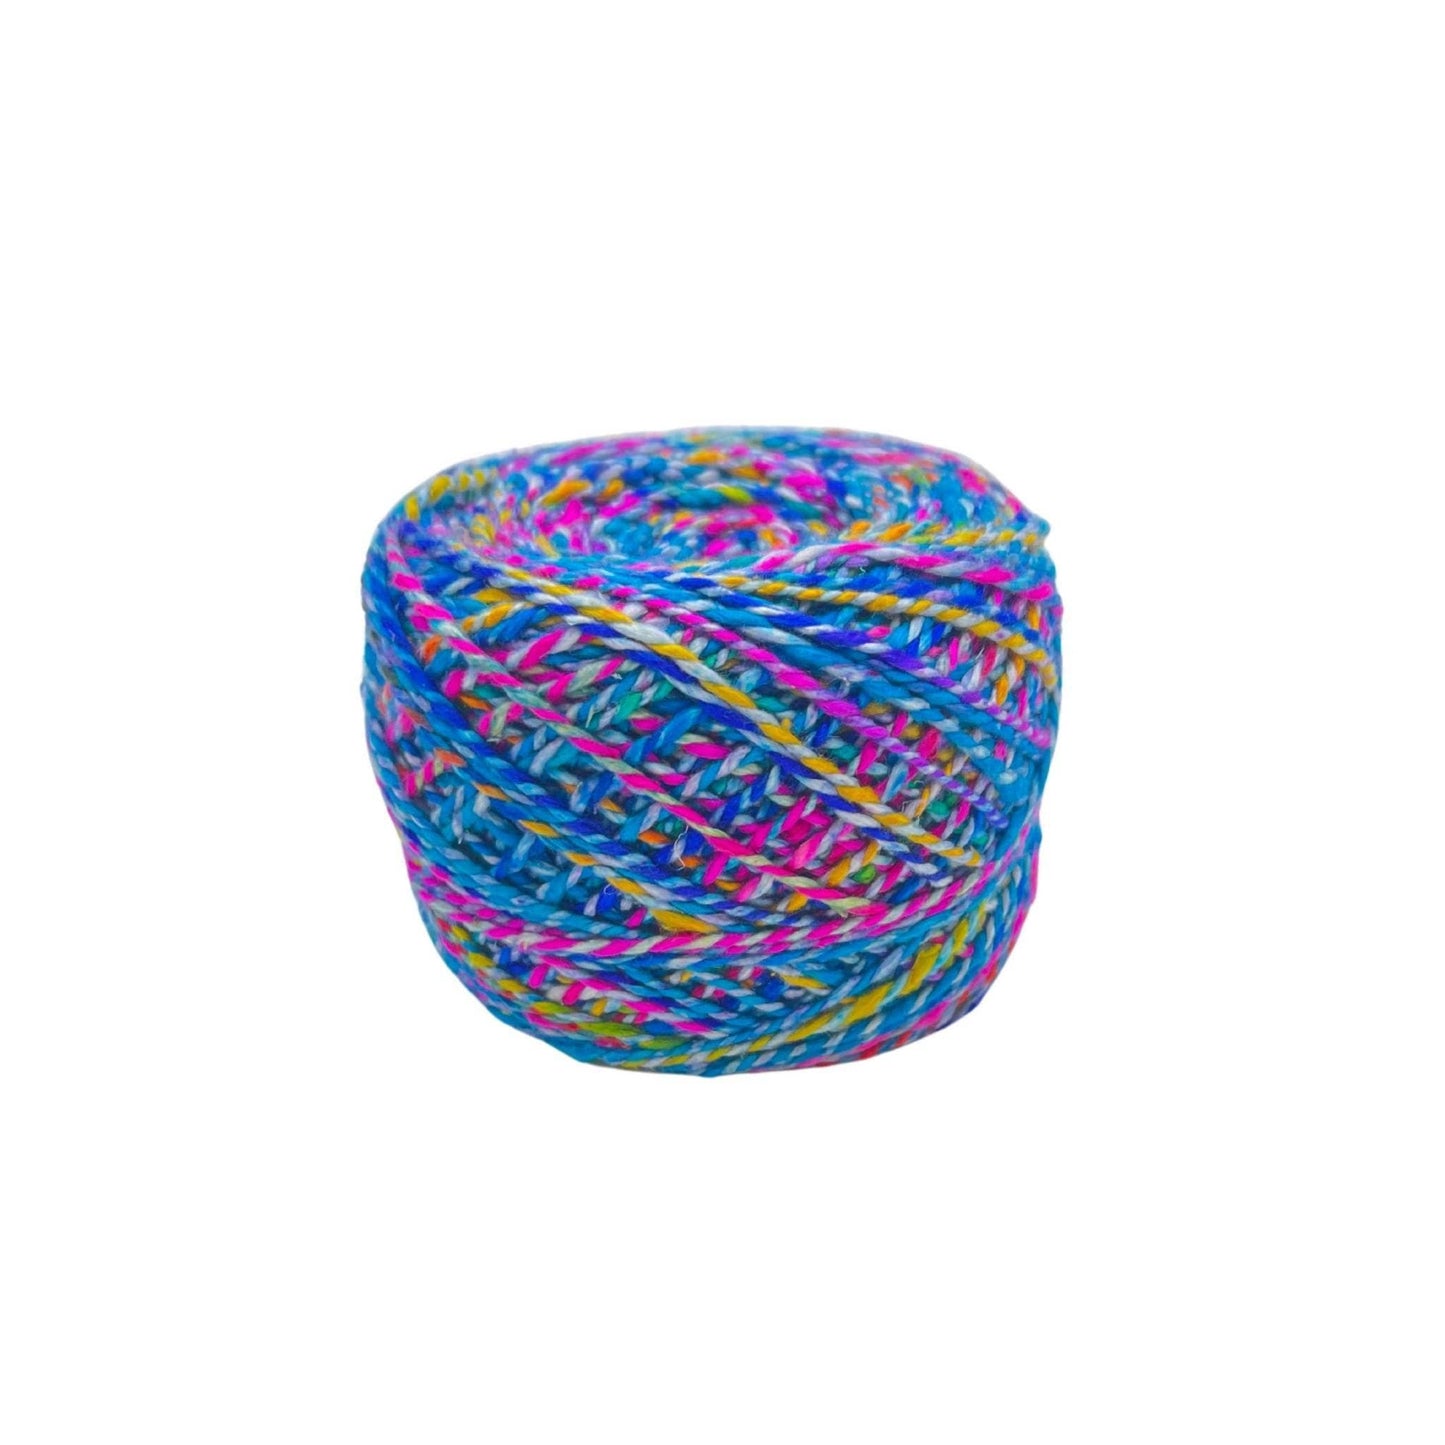 a cake of variegated twisted silk yarn in light blue, dark blue, pink, purple and yellow.